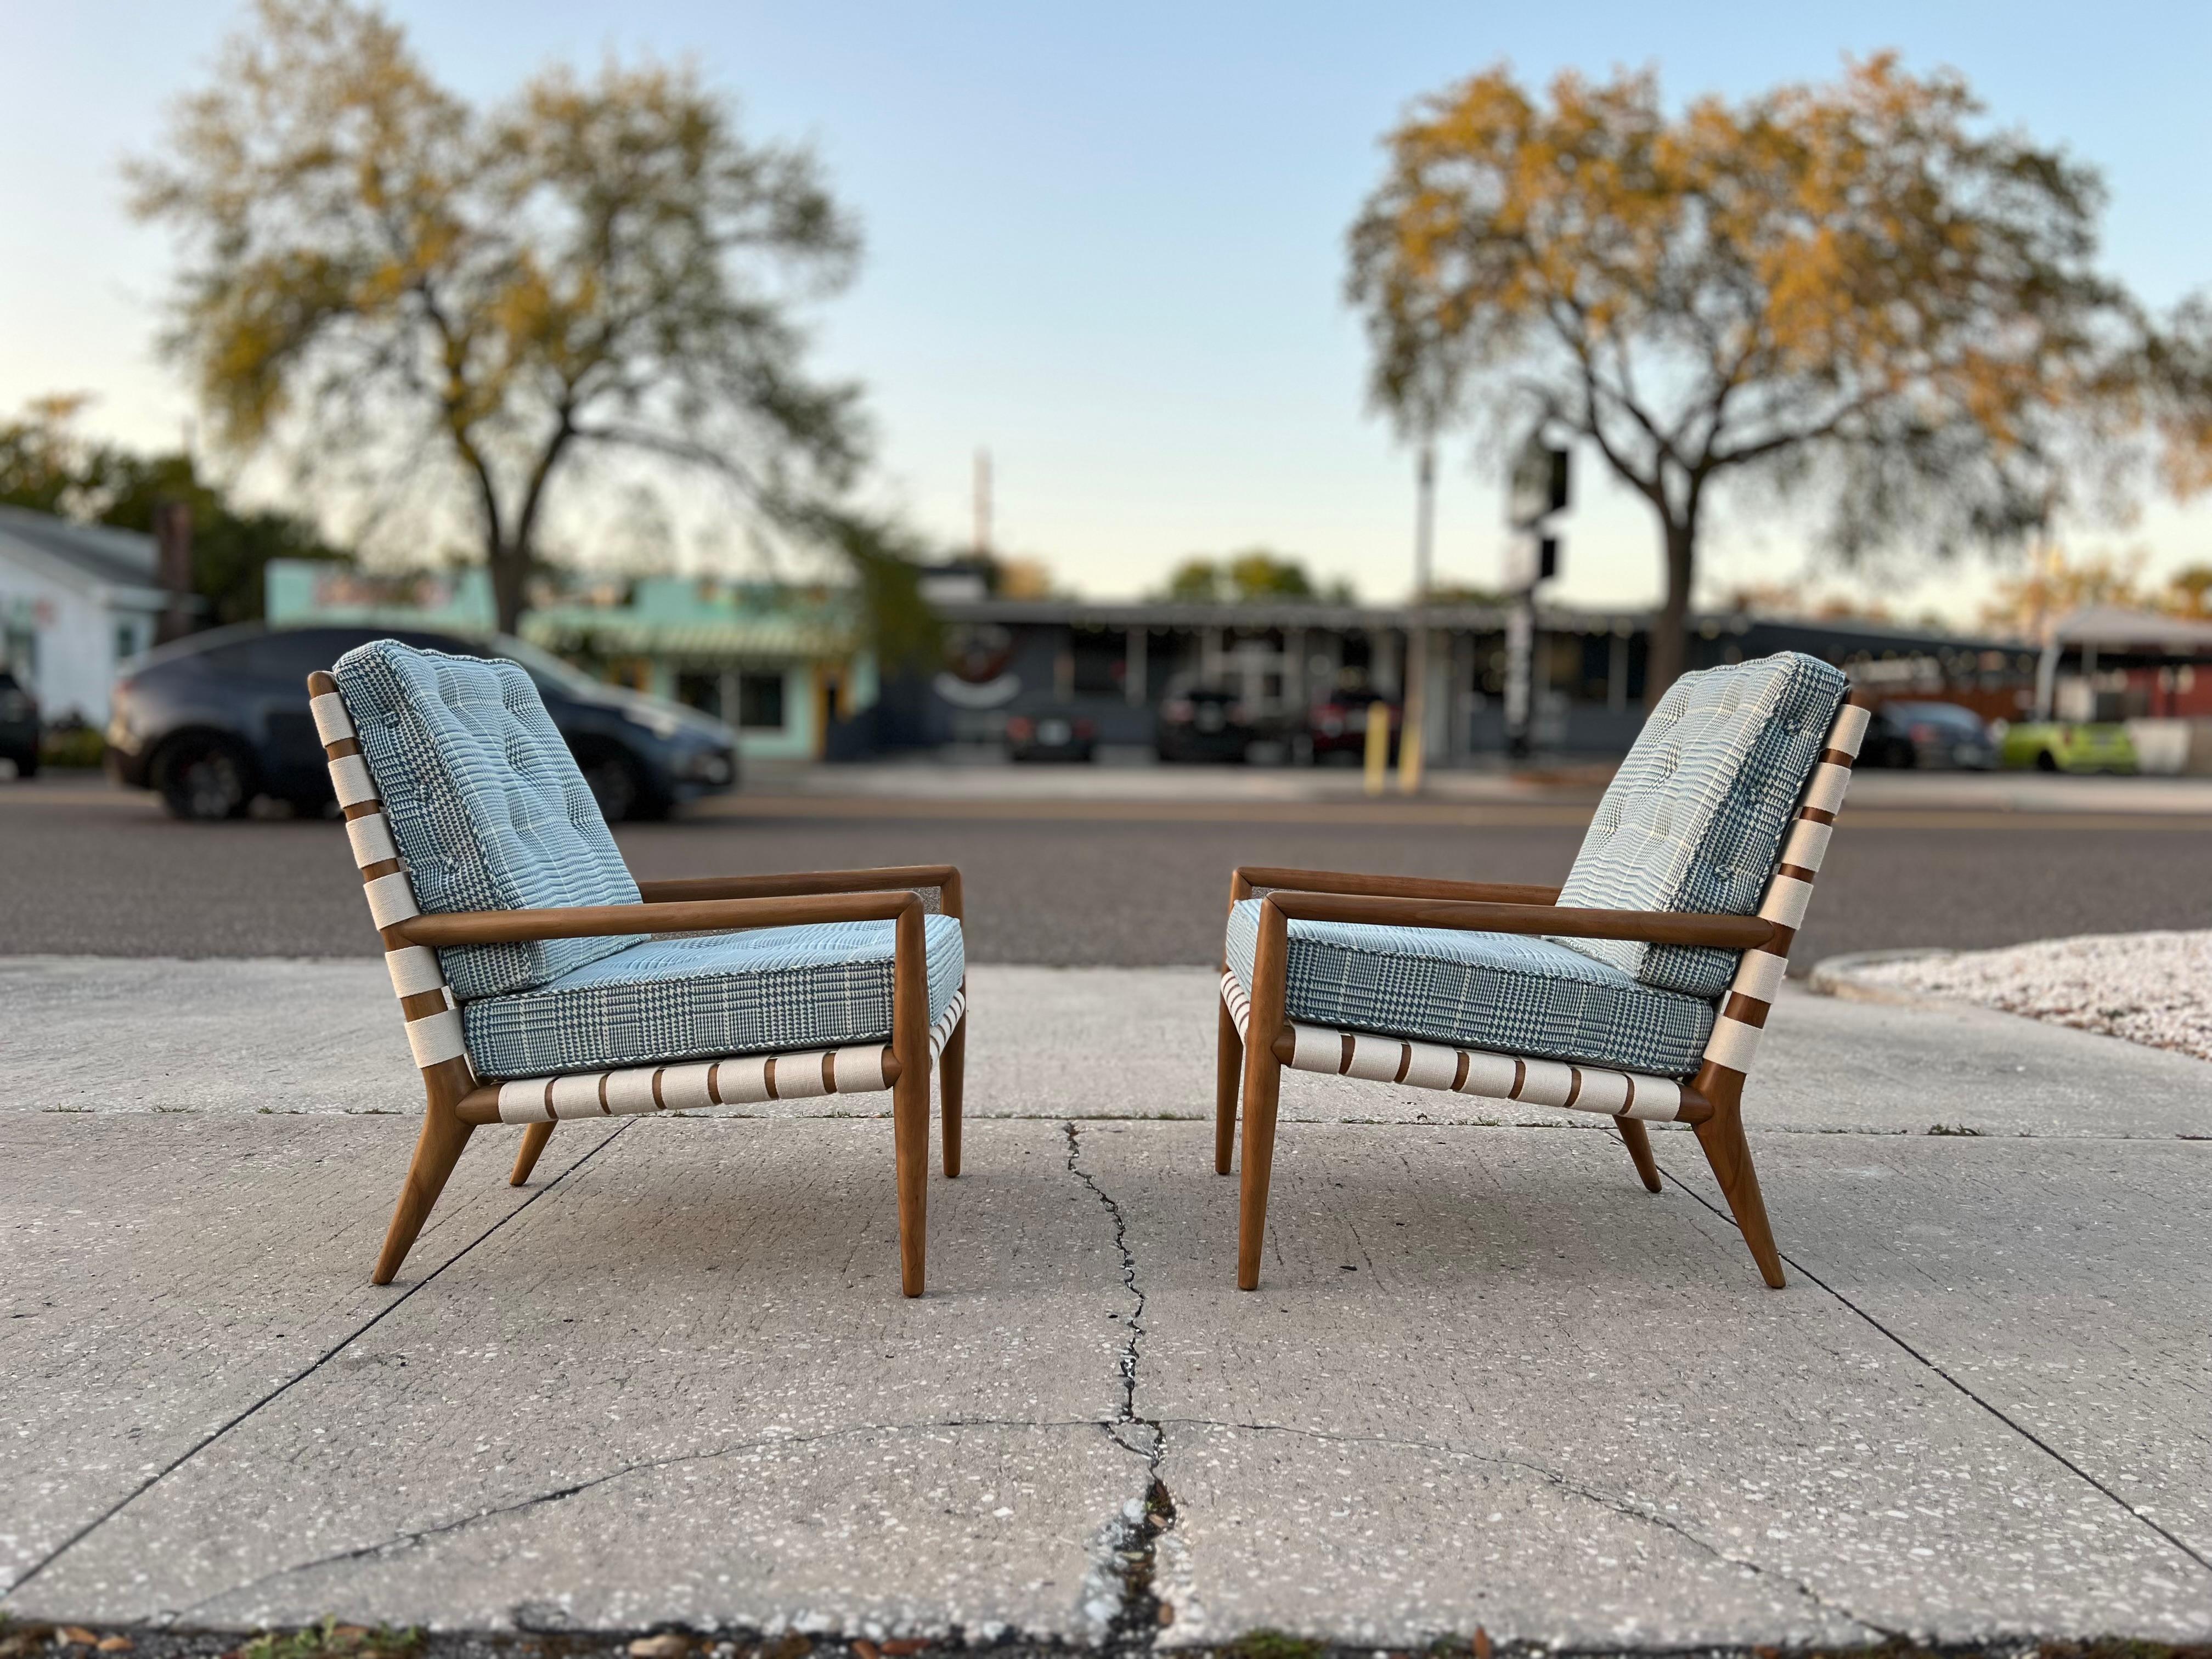 A pair of fabulous, original T.H.Robsjohn-Gibbings arm chairs with strapping. Model # 1720, as referenced in the vintage Widdicomb catalog, these chairs are original and vintage ca' 1950's. Completely restored with new finish, new strapping and new